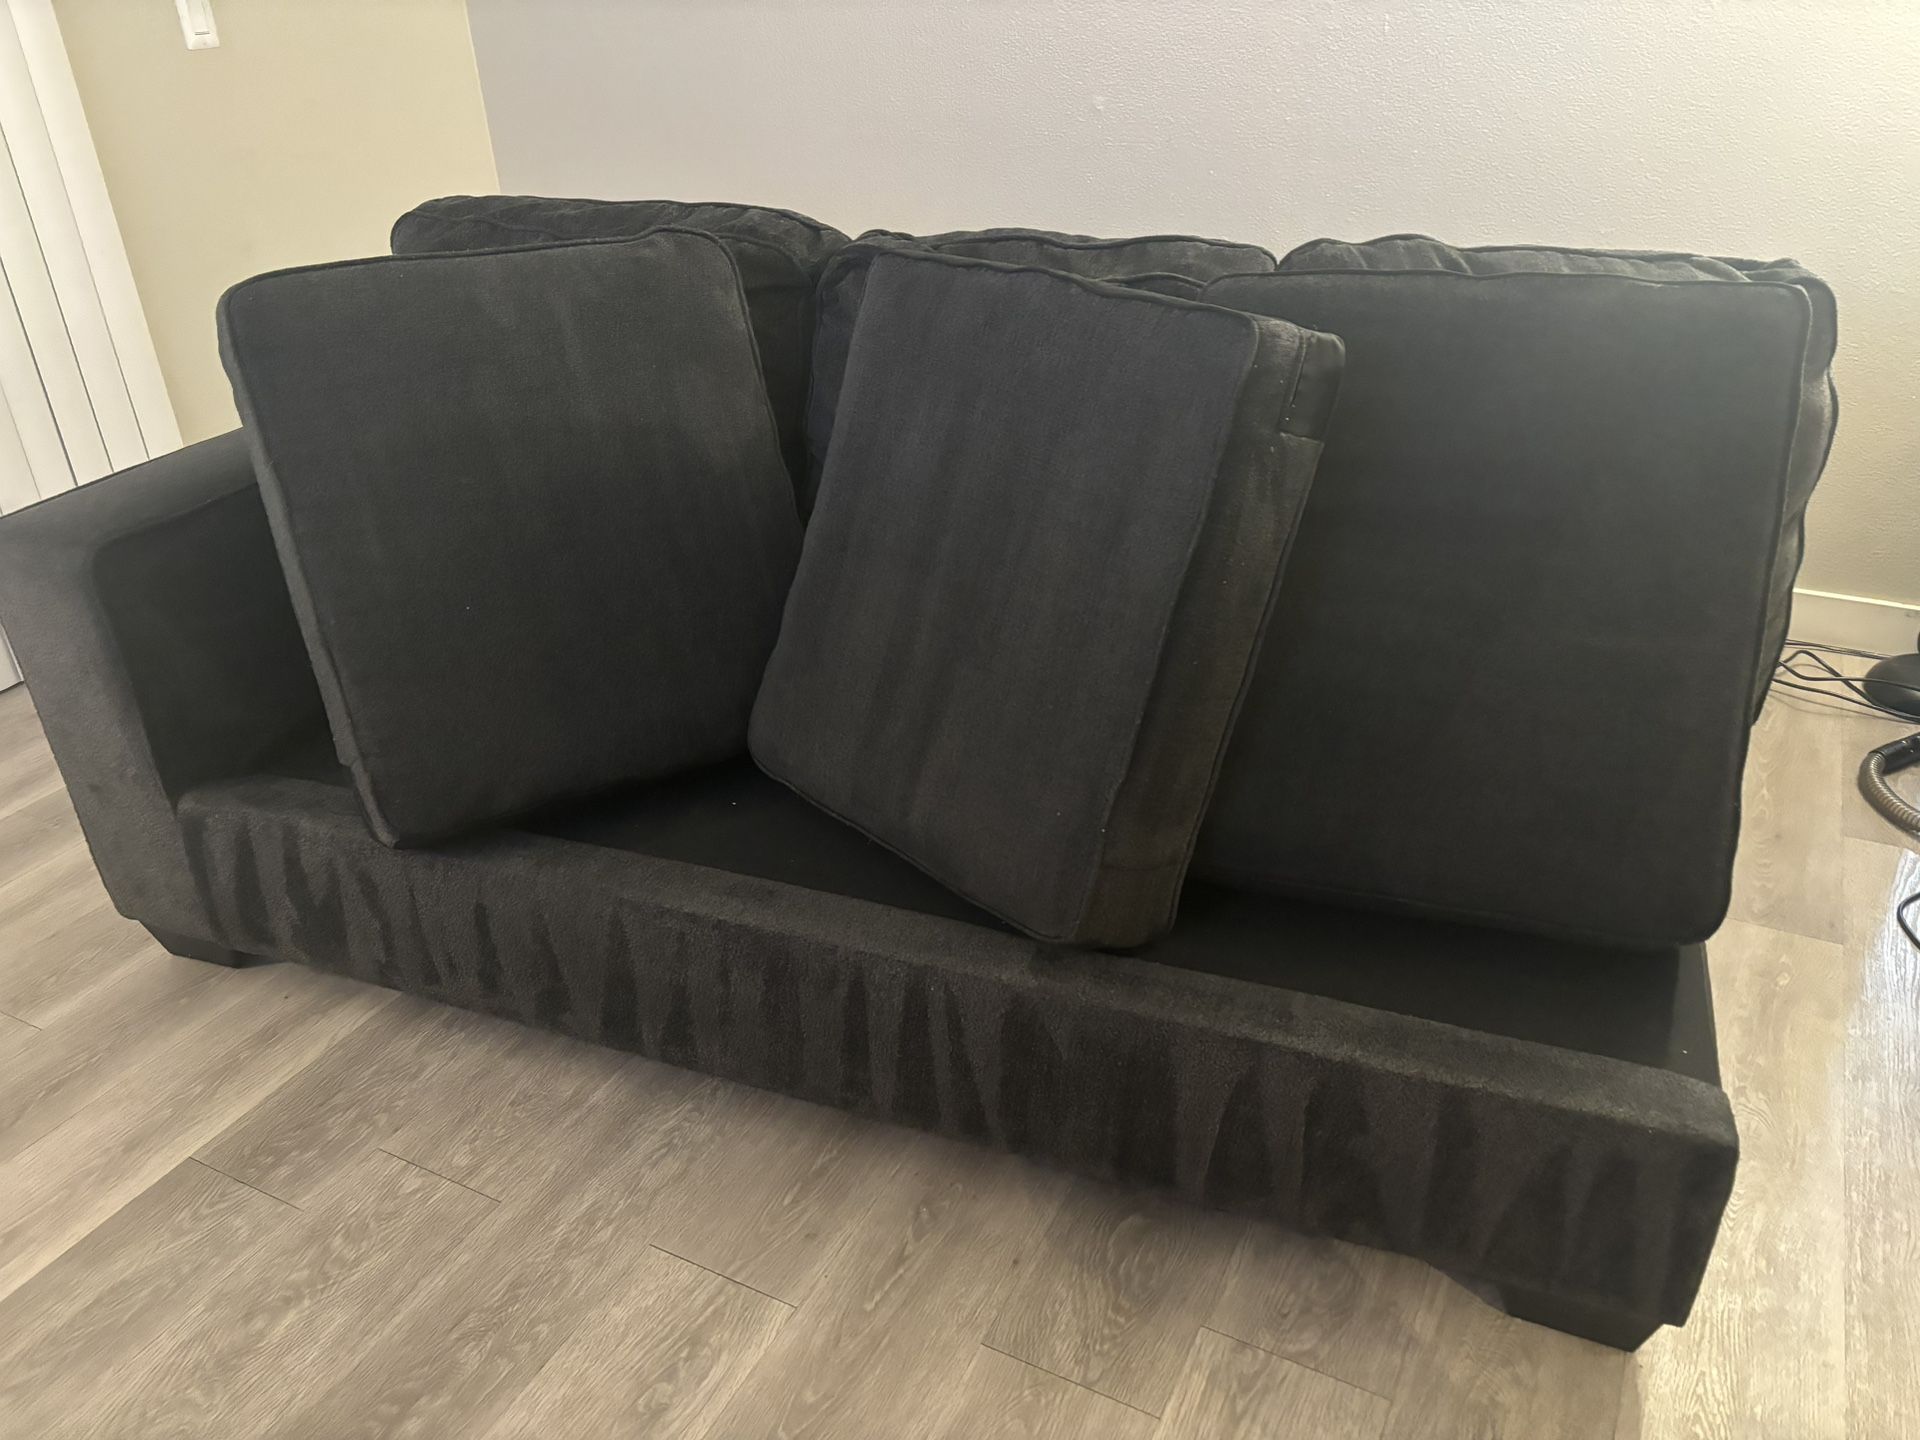 Dark Grey Sectional Couch